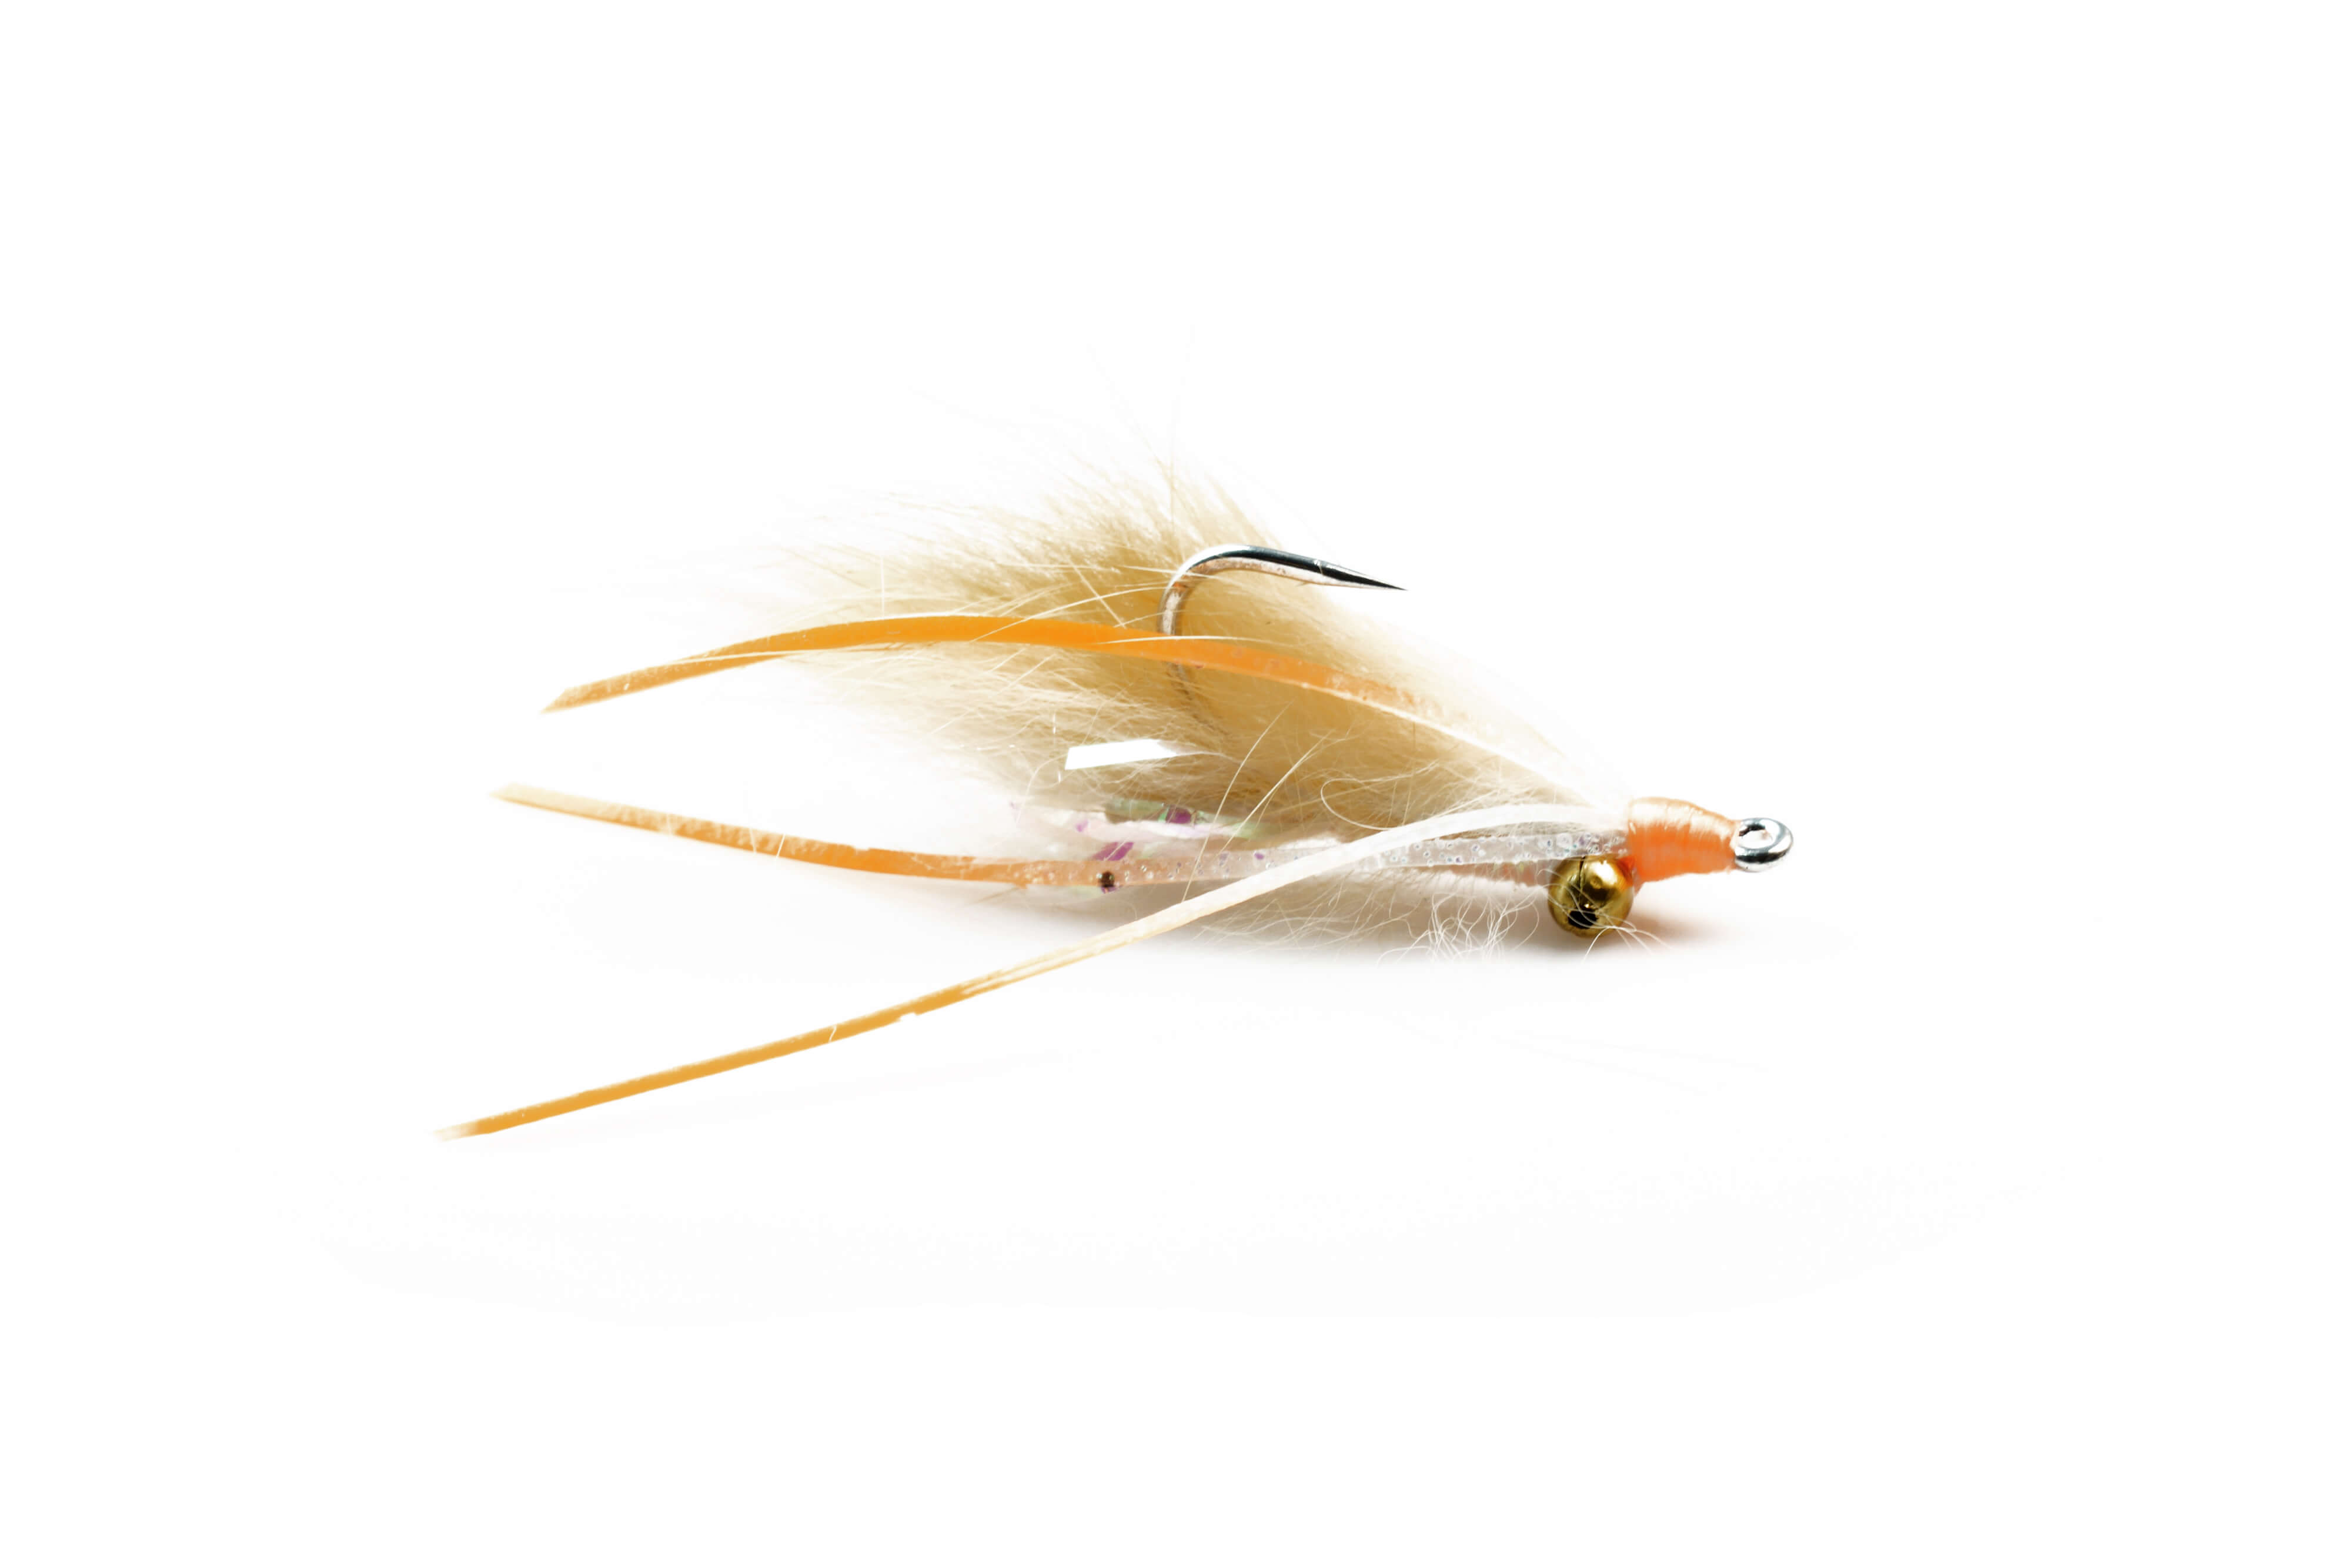 10 must have flies for saltwater fly fishing - Tail Fly Fishing Magazine